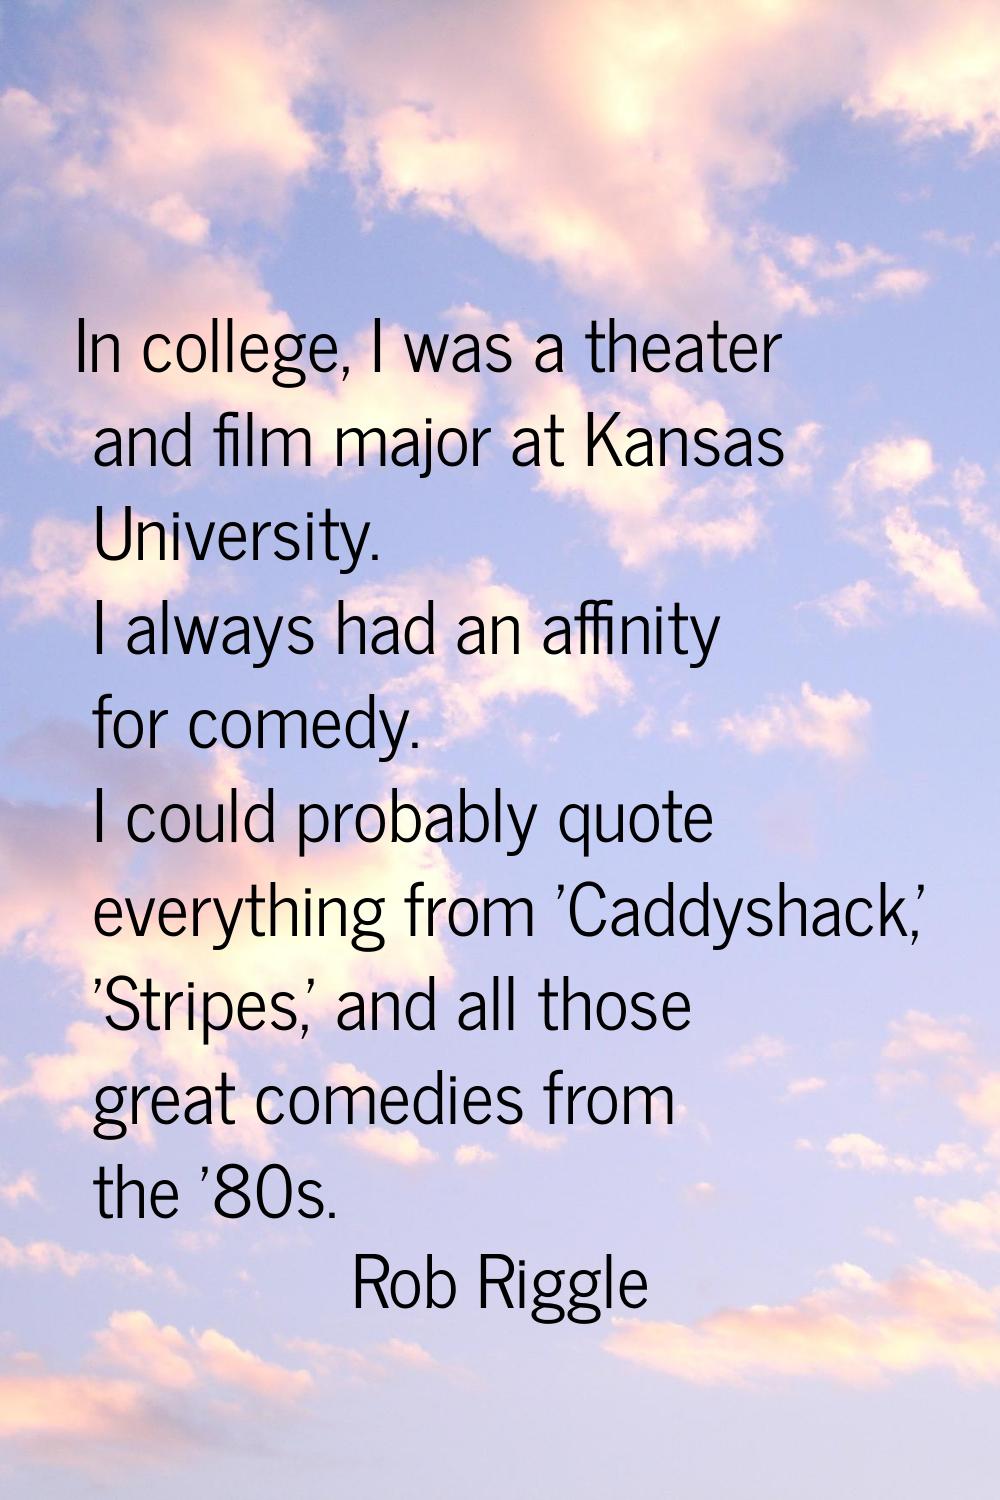 In college, I was a theater and film major at Kansas University. I always had an affinity for comed